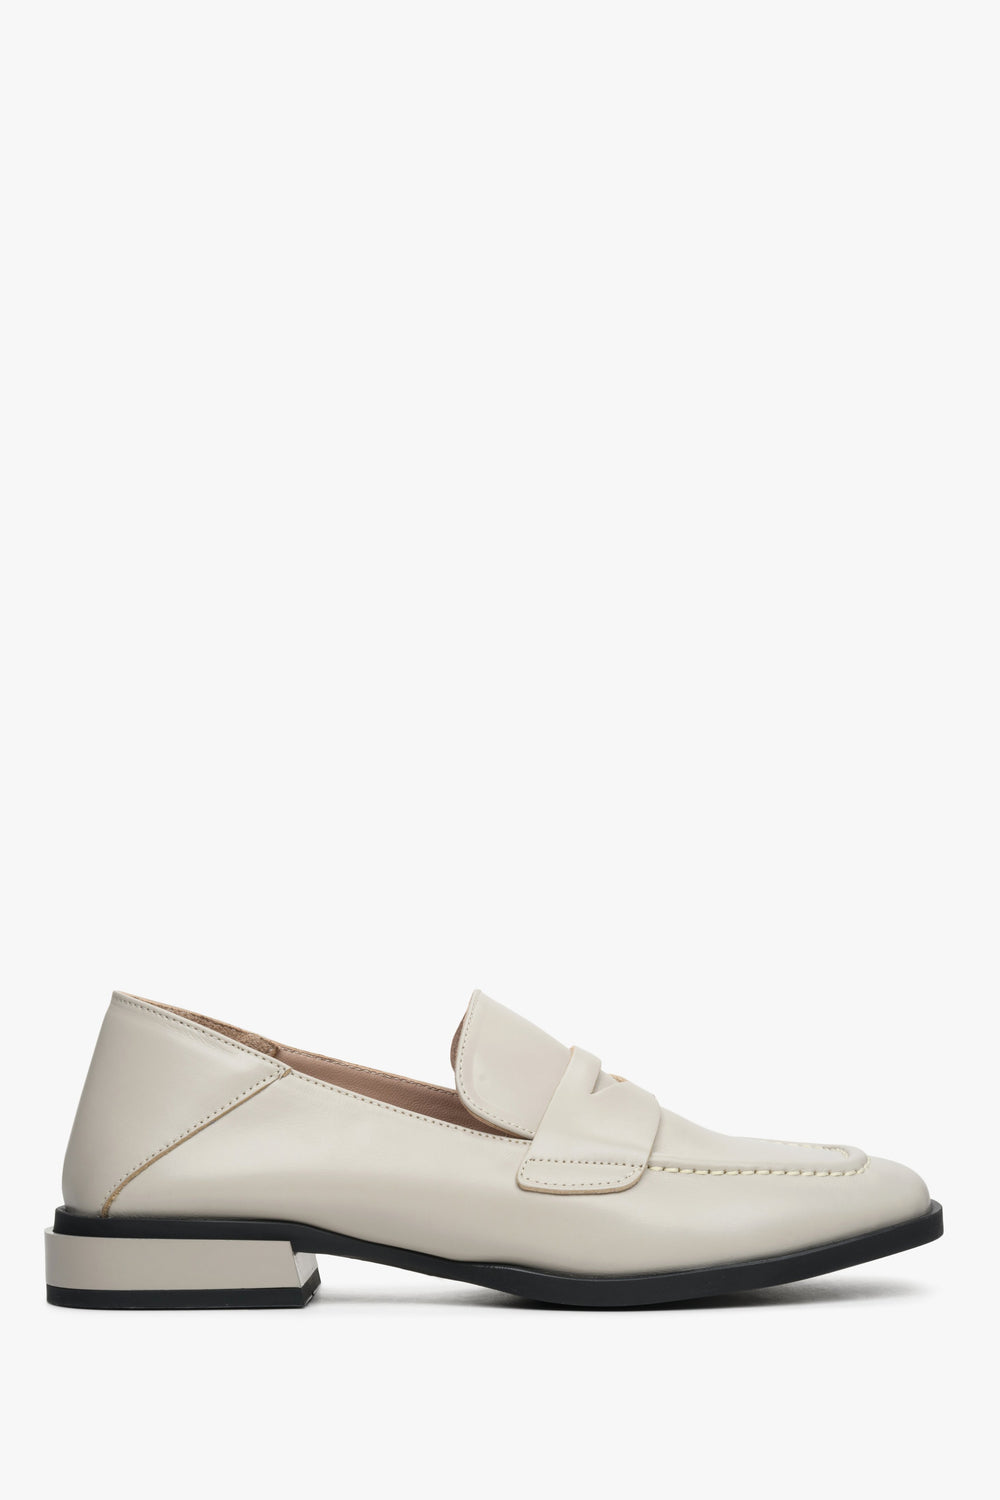 Women's Beige Leather Loafers with a Low Heel Estro ER00112825.